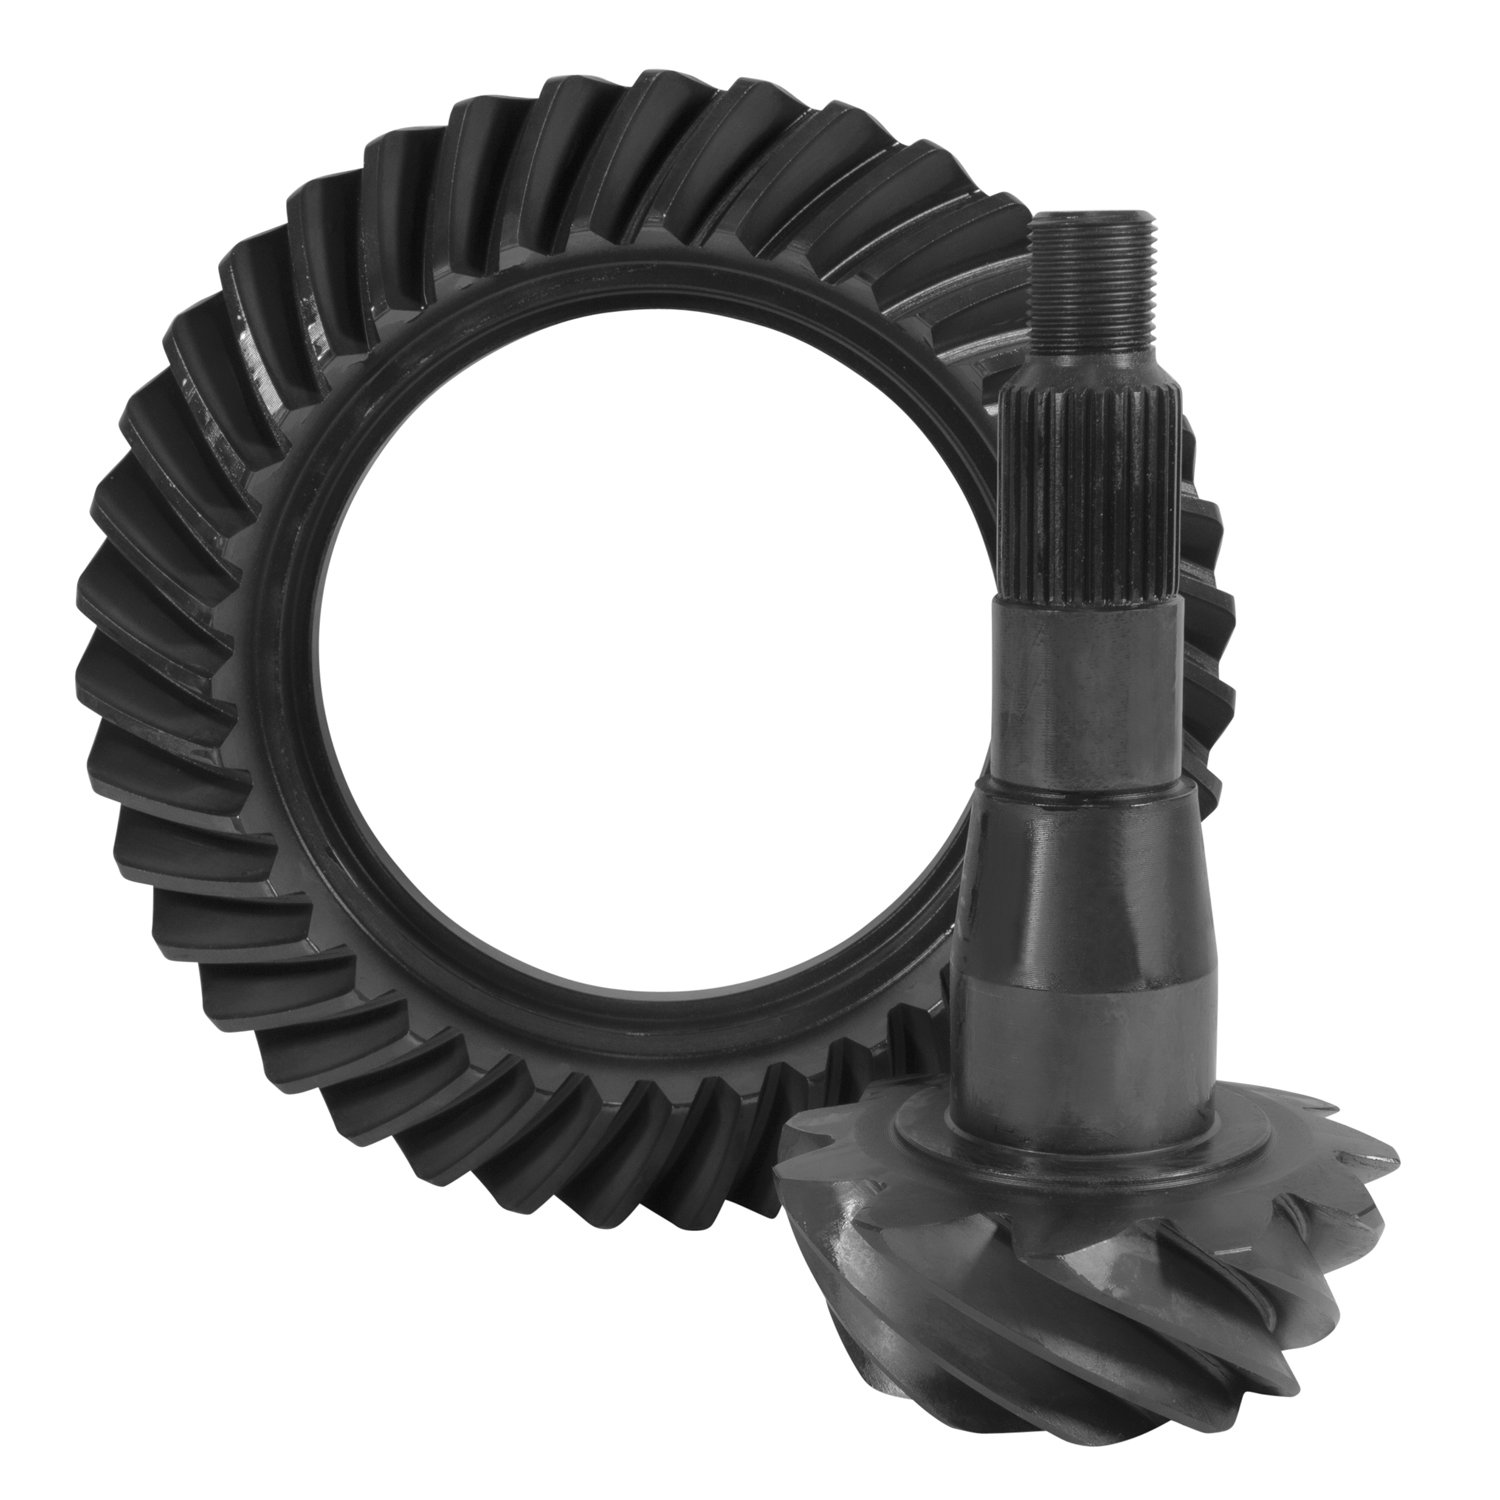 USA Standard ZG C9.25-321 Ring & Pinion Gear Set, For '10 & Down Chrysler 9.25 in., 3.21 Ratio